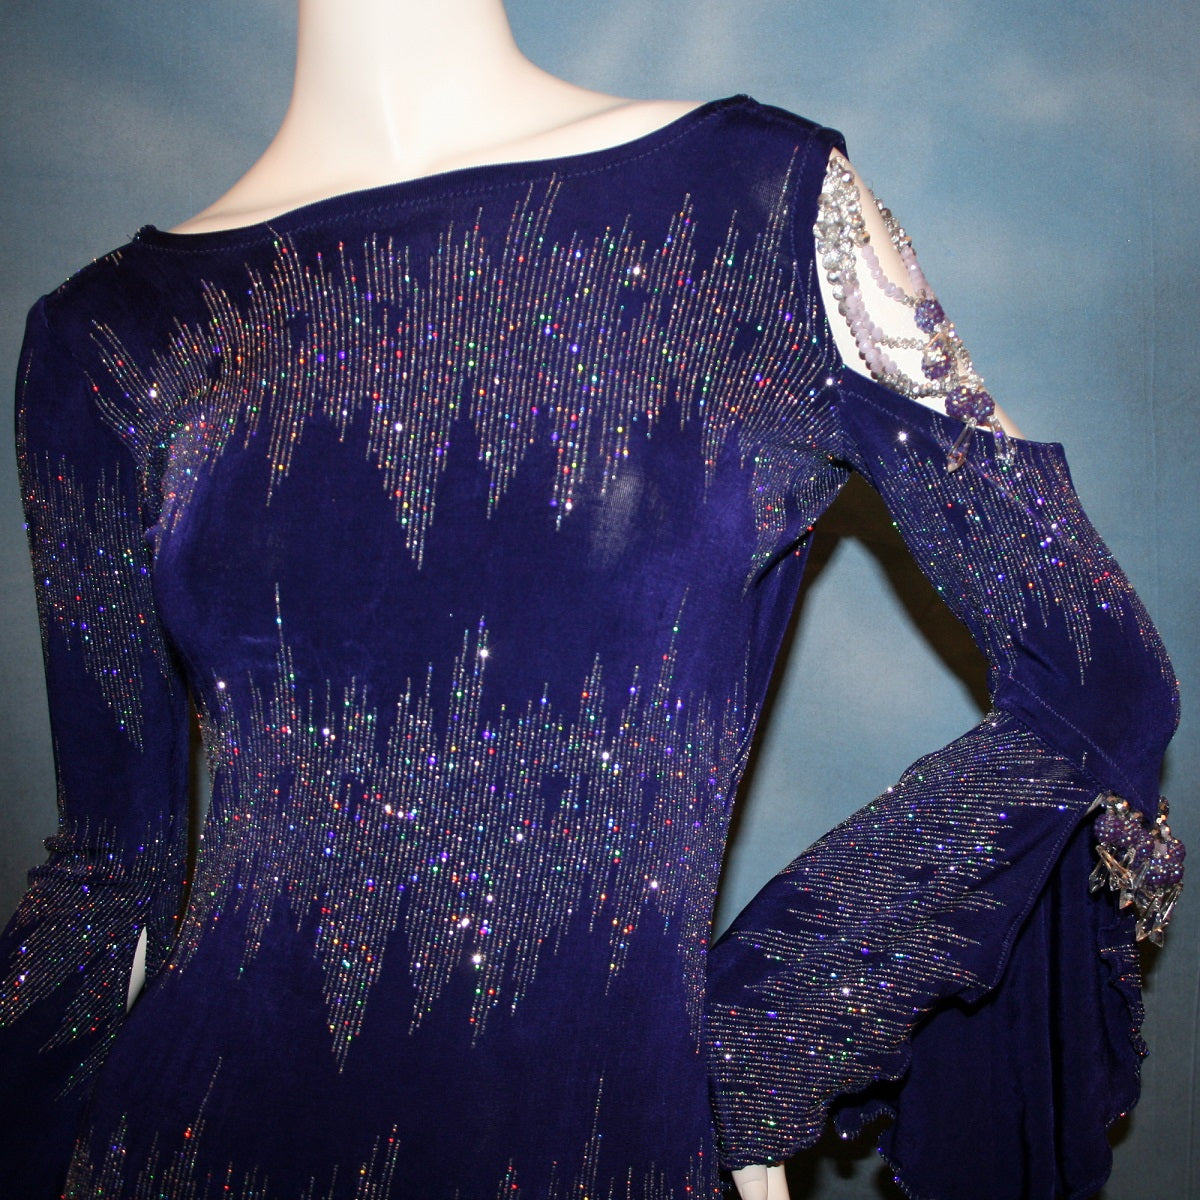 close up front view of Deep royal purple Latin/rhythm/tango dress created in deep royal purple glitter slinky with an awesome electrifying glitter pattern features one longe sleeve, with flair at the bottom, & another very interesting cold shoulder detailed one with hand beading & a flaired flounce.